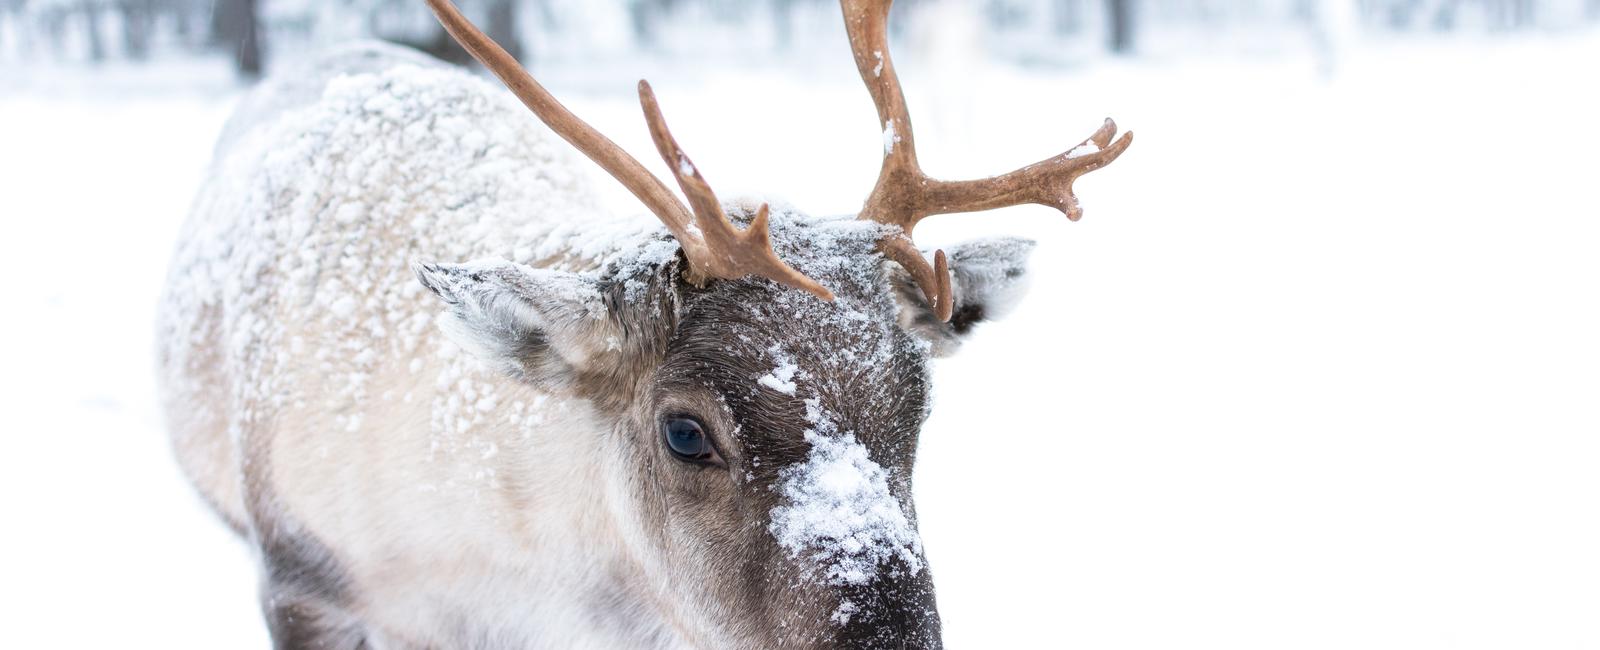 Reindeers eat moss because it contains a chemical that stops their body from freezing